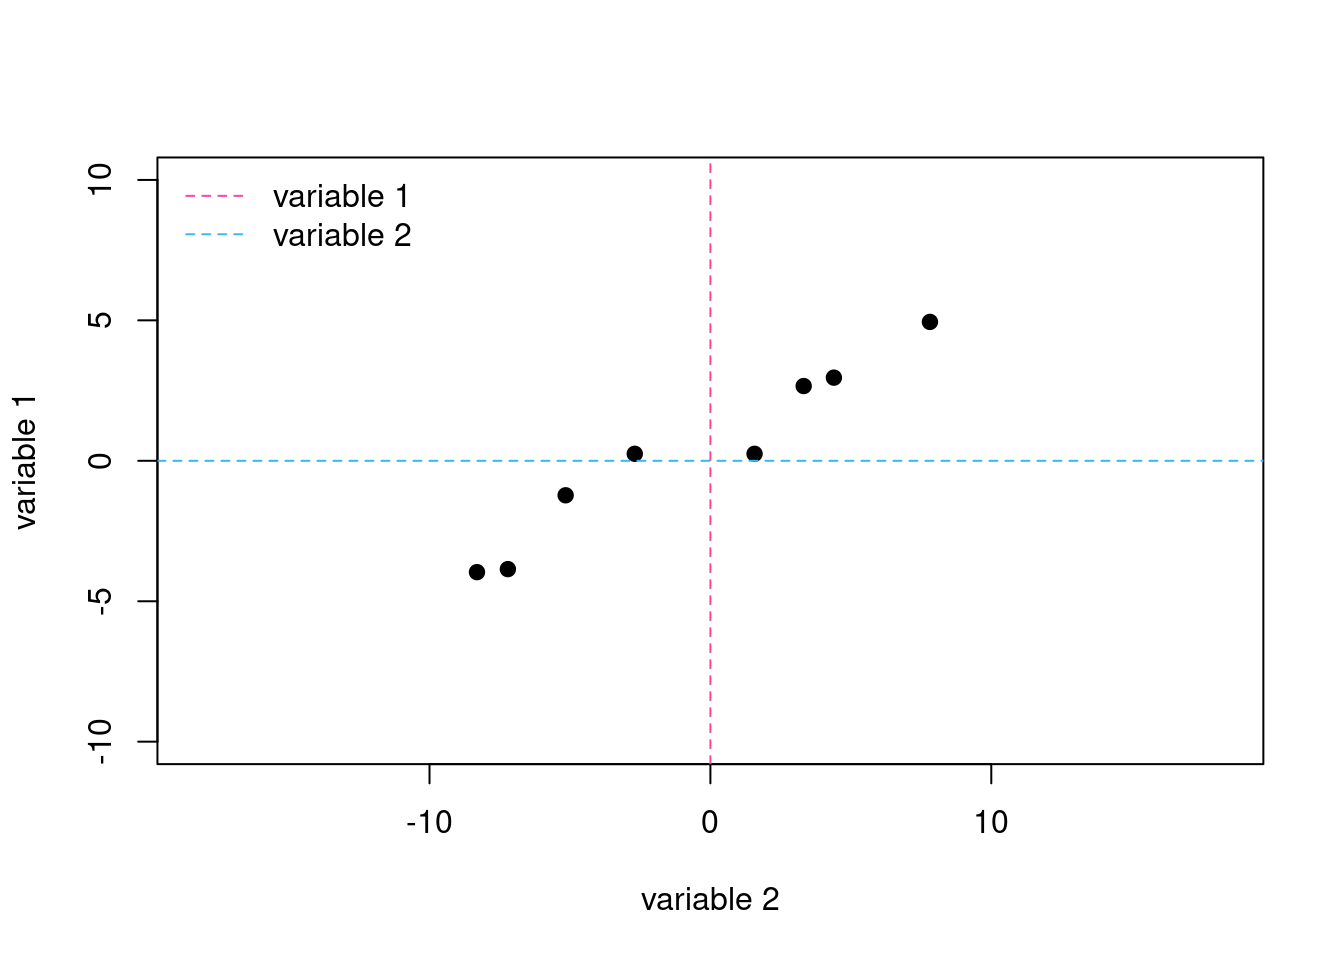 Scatterplot of variable 1 and variable 2 for our eight samples. The dashed lines are the original axes with variable 1 shown in pink and variable 2 shown in blue.